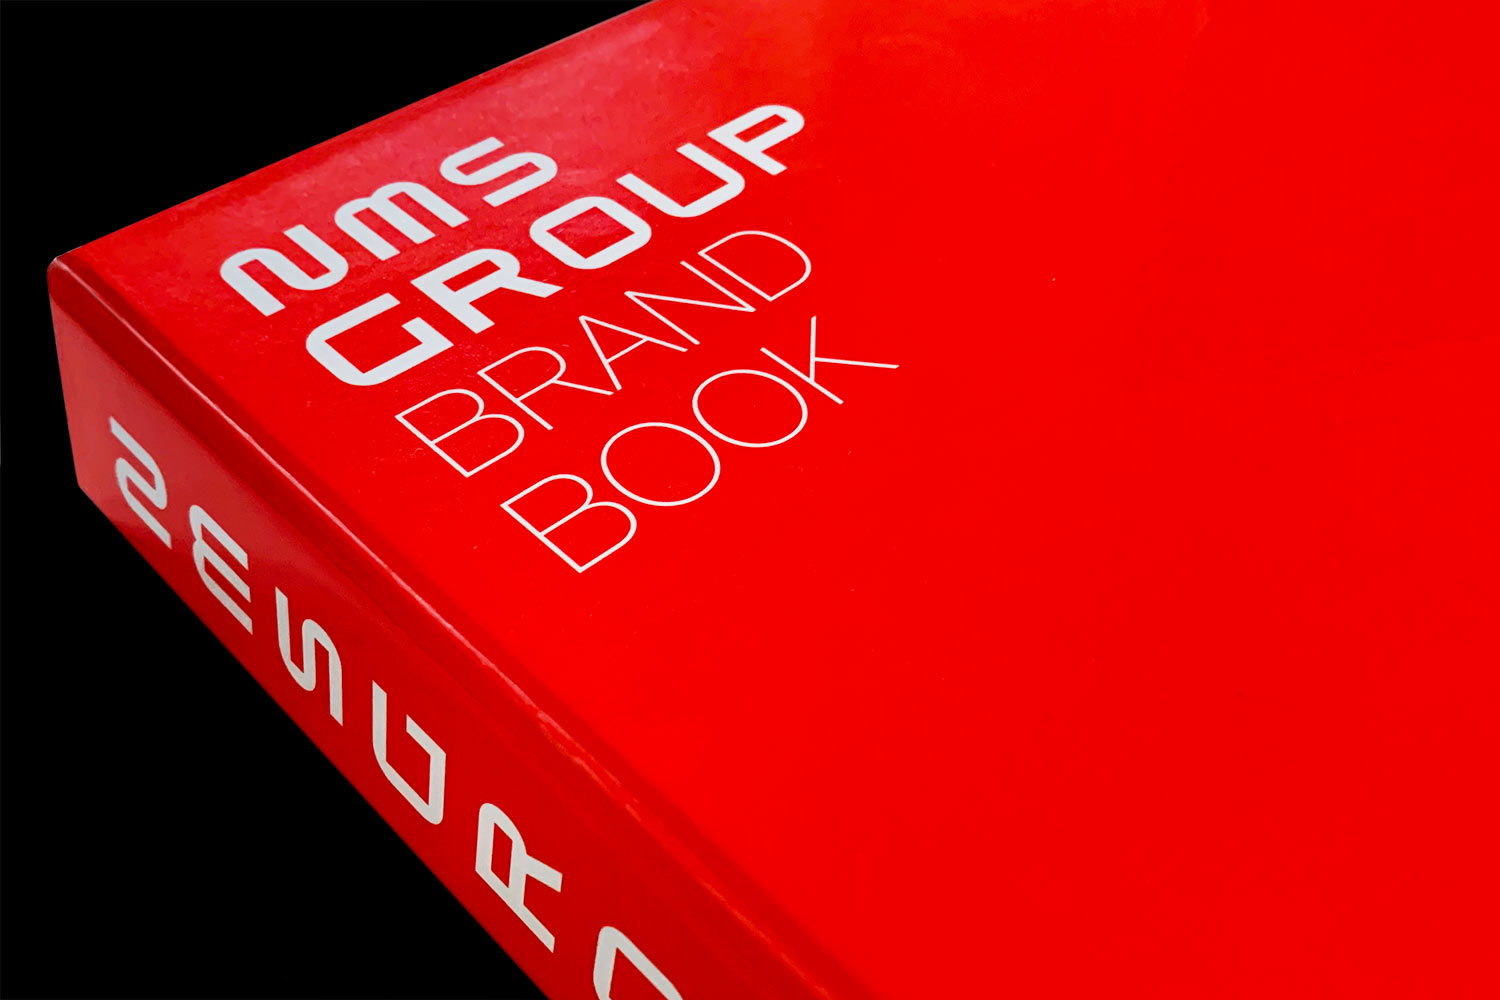 nms group brand book